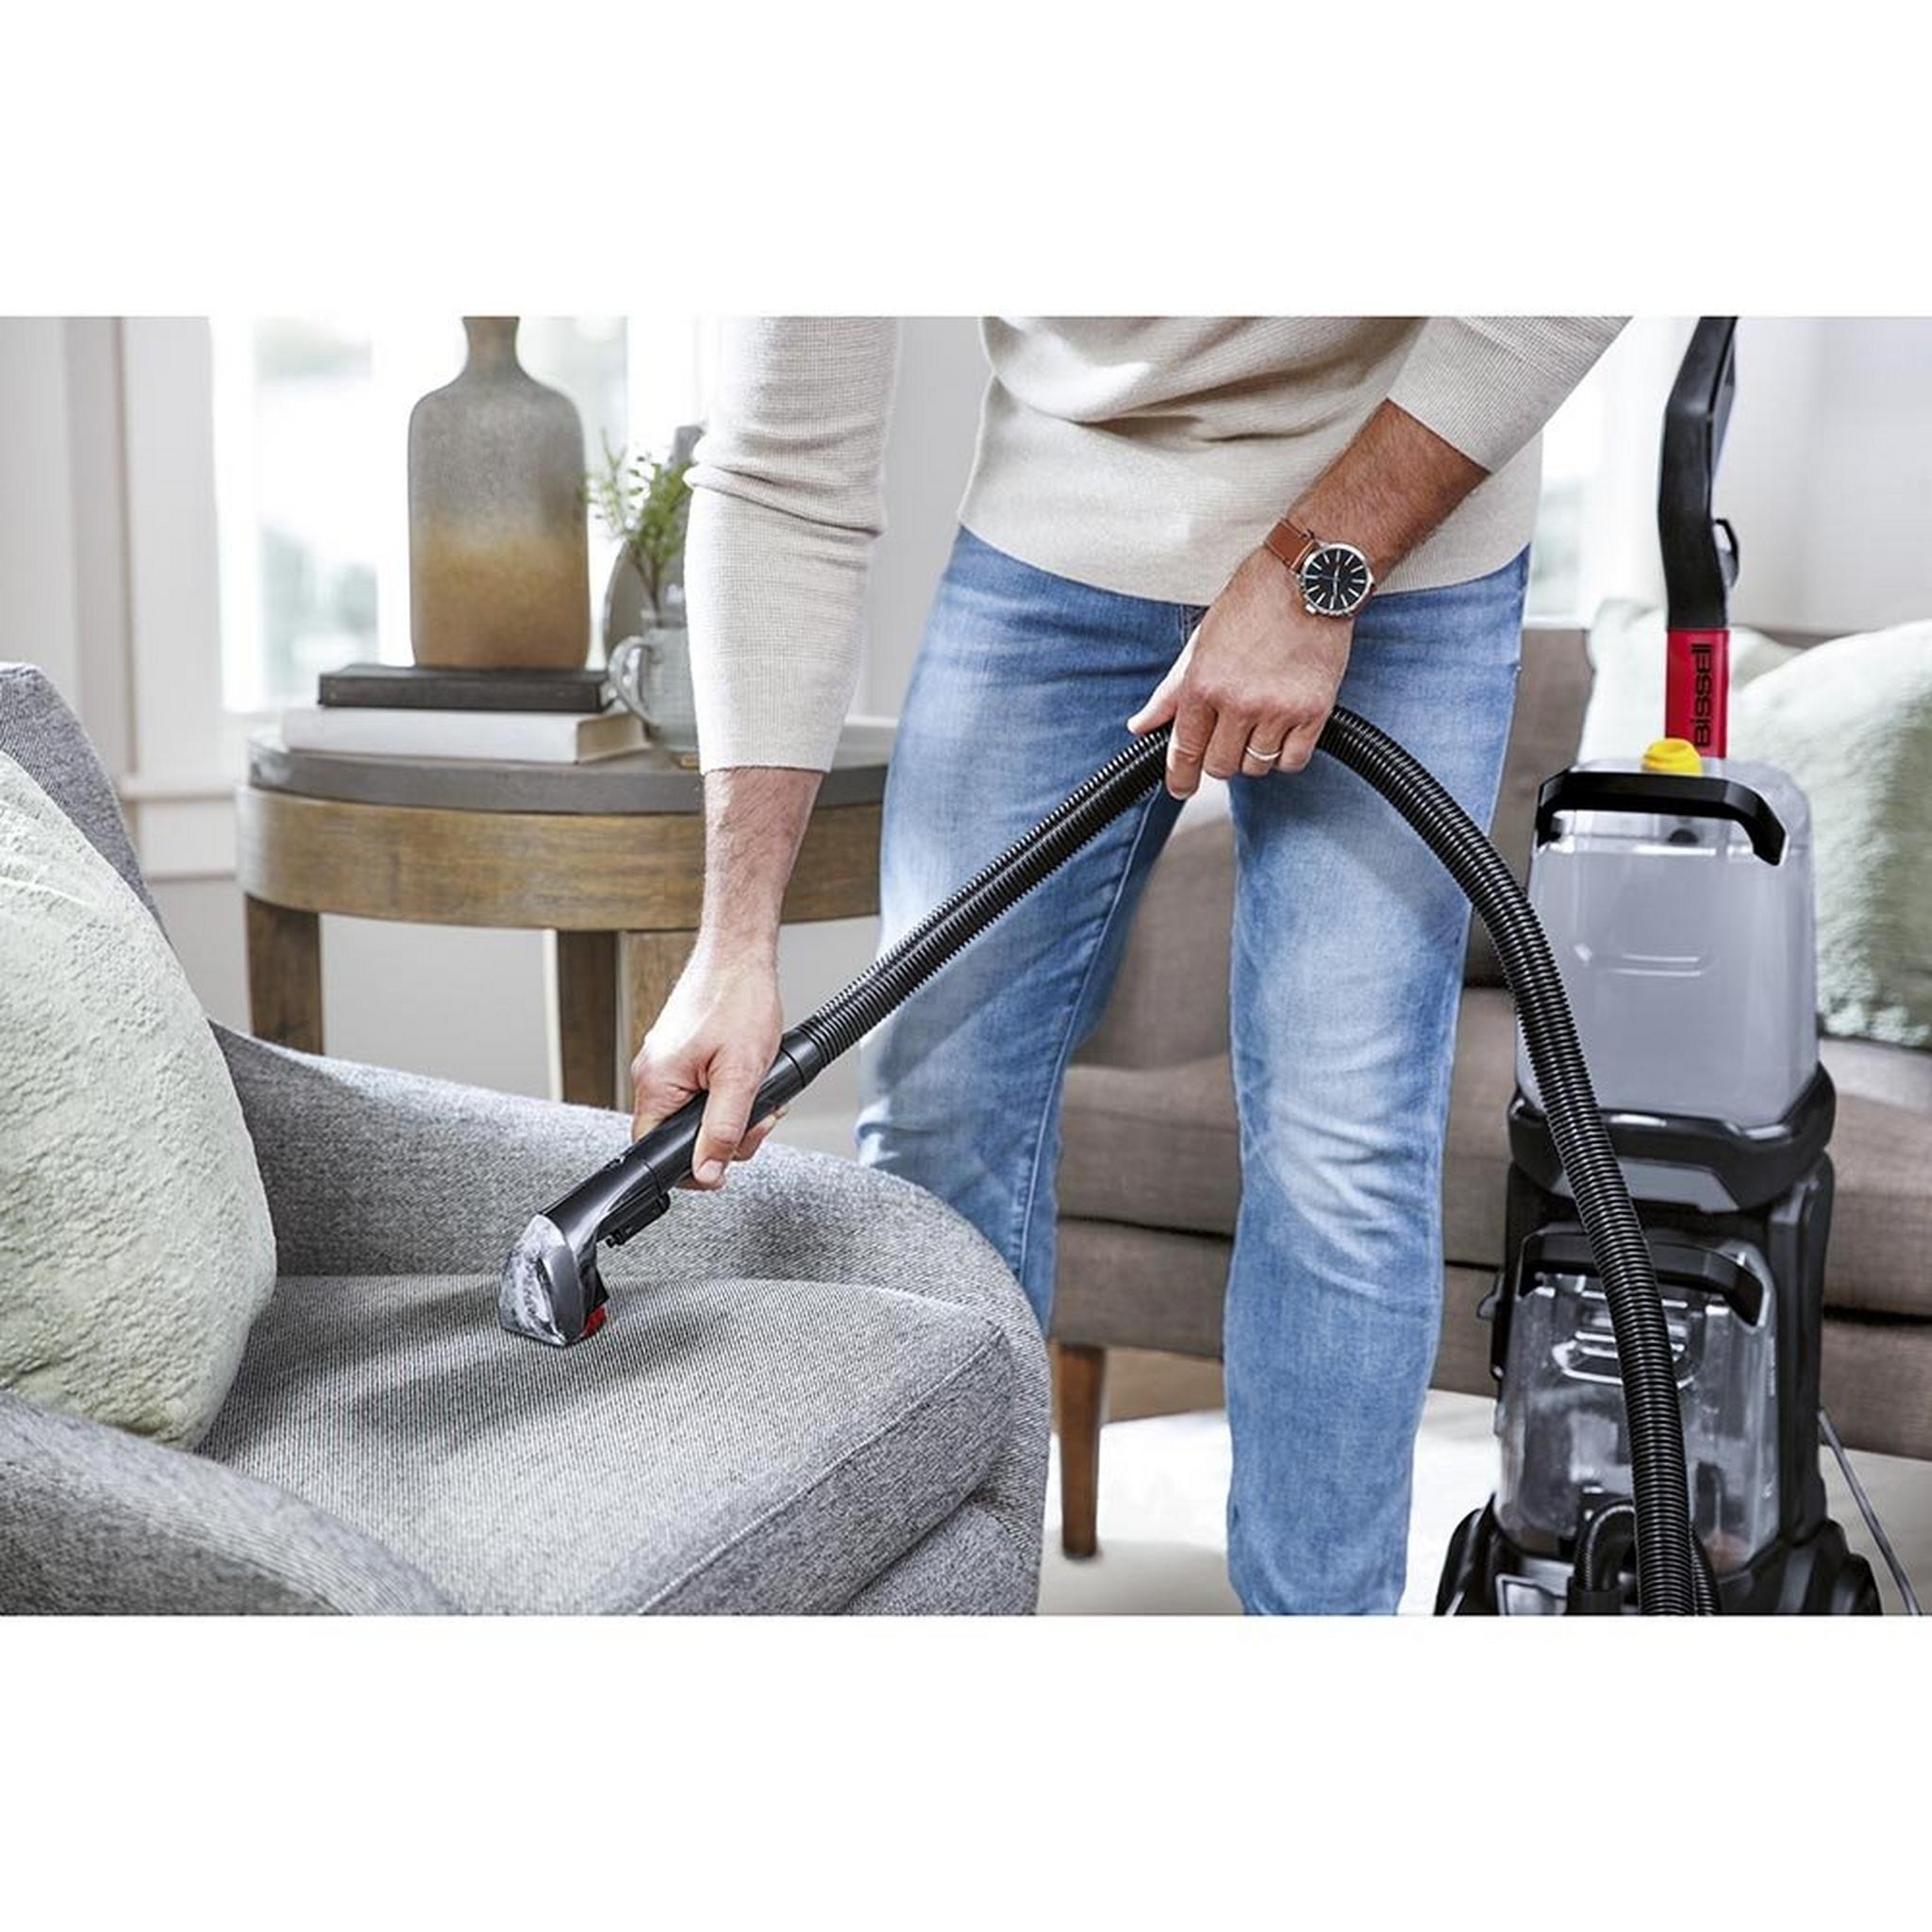 3112K BISSELL PowerClean 2X Powerful Carpet Cleaner, Intuitive Two-Tank System Color Charcoal Gray/Mambo Red 4.7L/3.8L